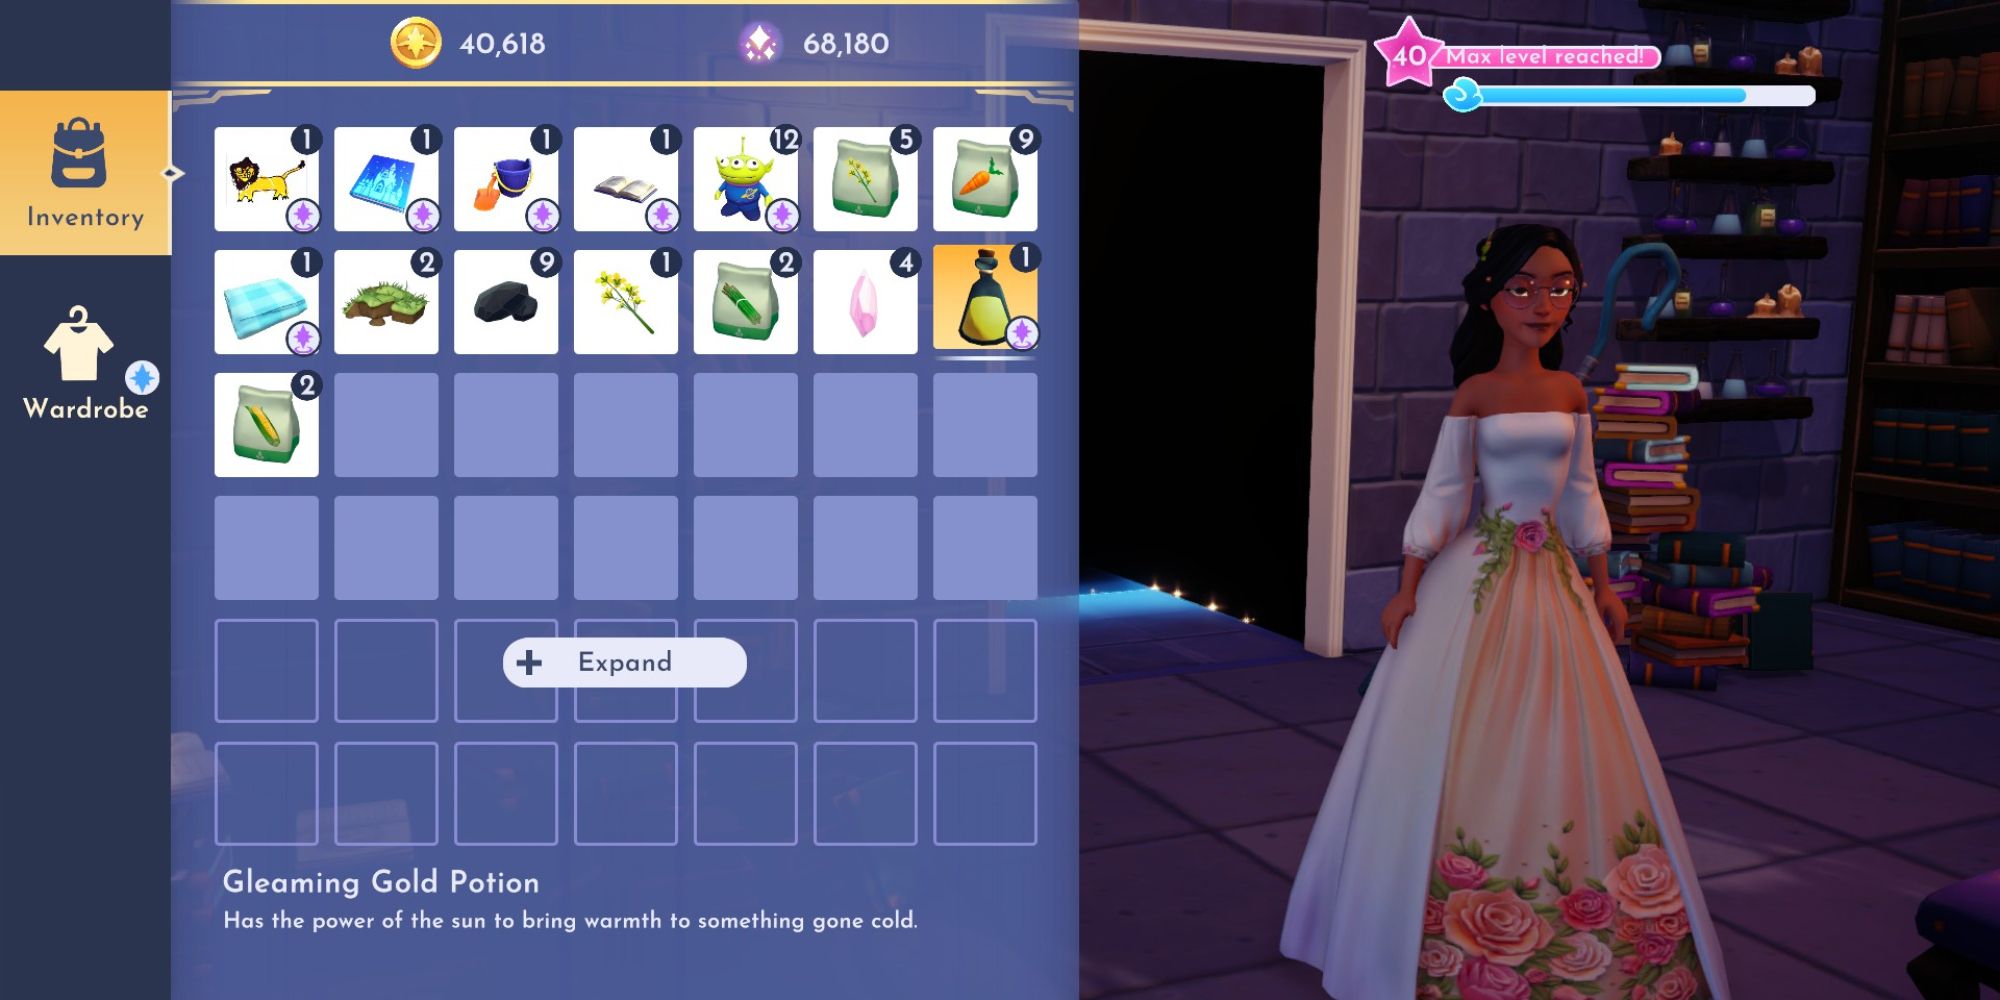 Disney Dreamlight Valley Player inventory above the glittering golden potion